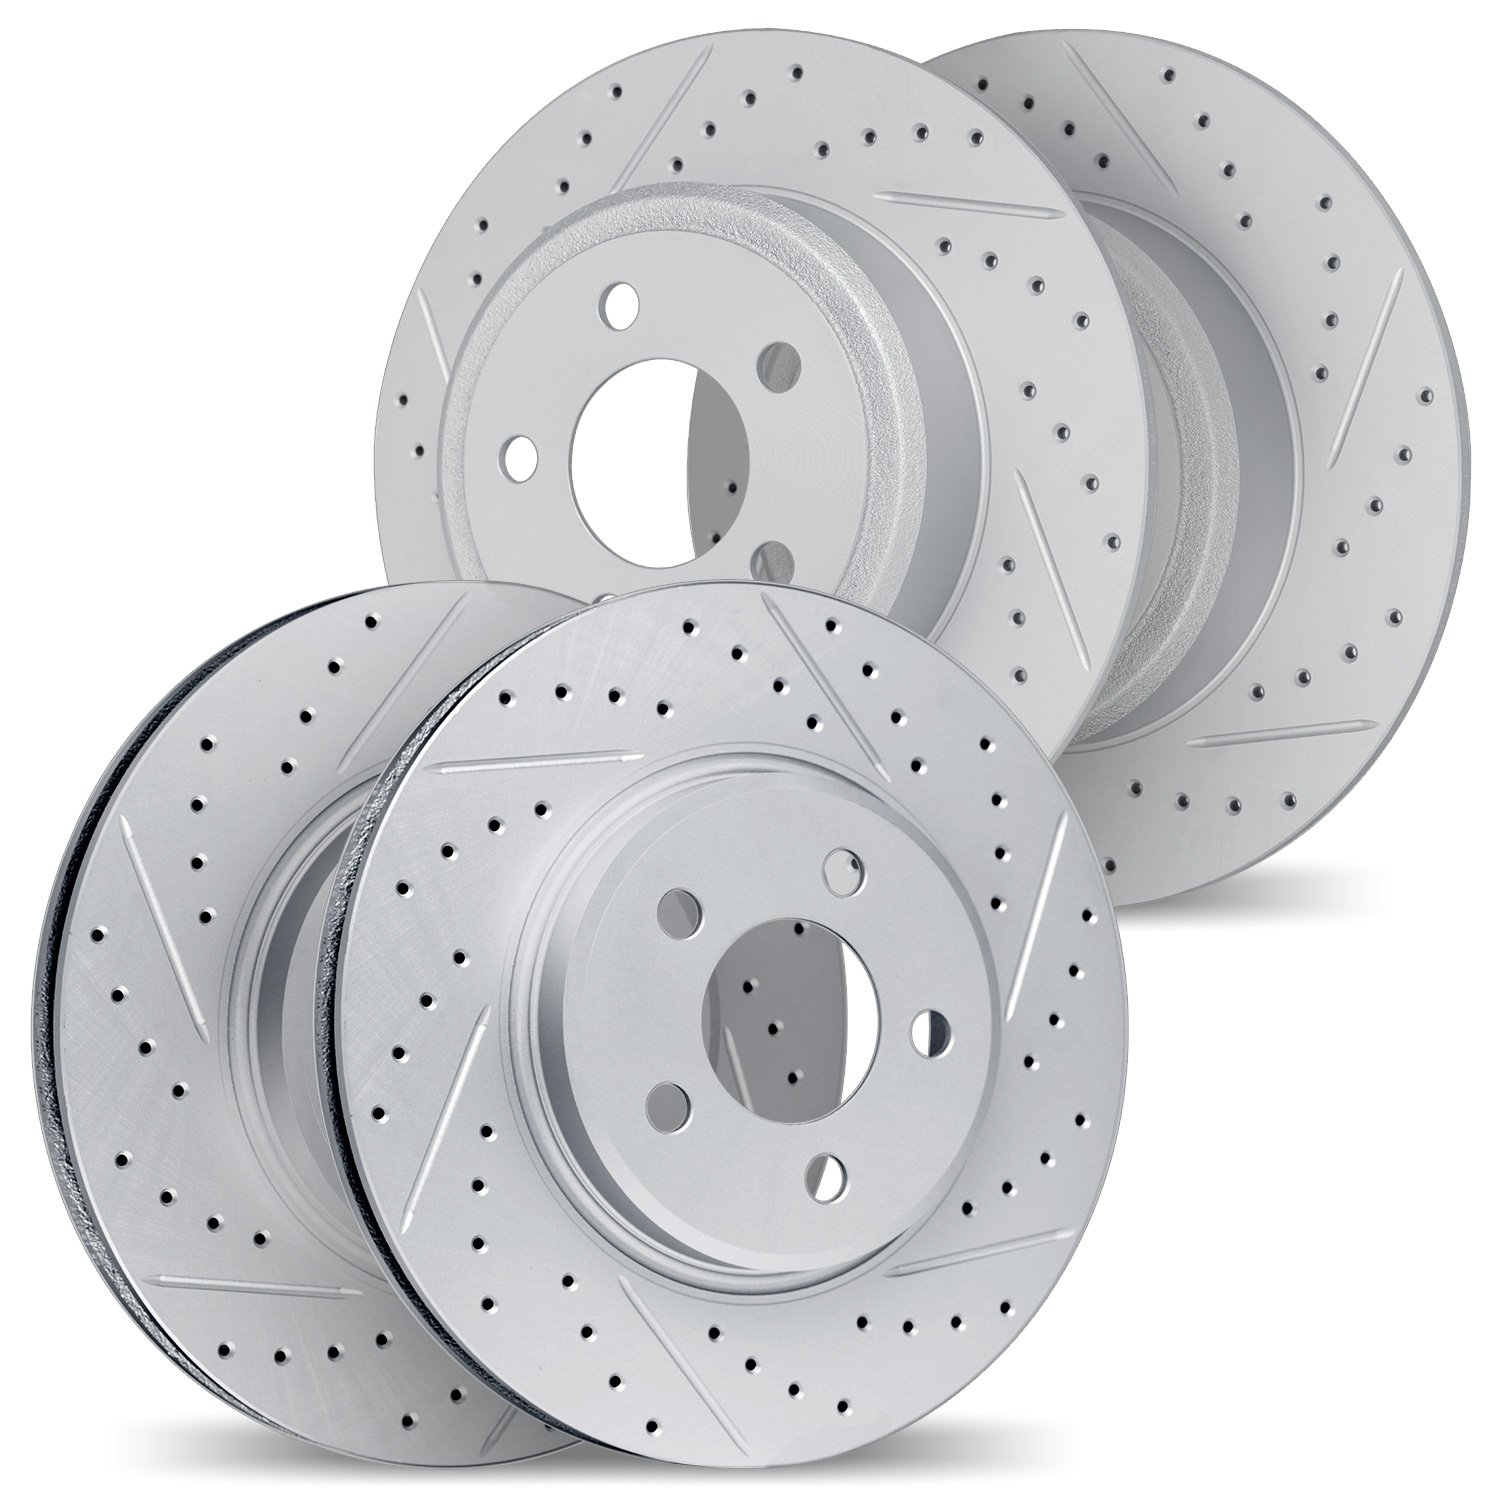 2004-76043 Geoperformance Drilled/Slotted Brake Rotors, Fits Select Lexus/Toyota/Scion, Position: Front and Rear